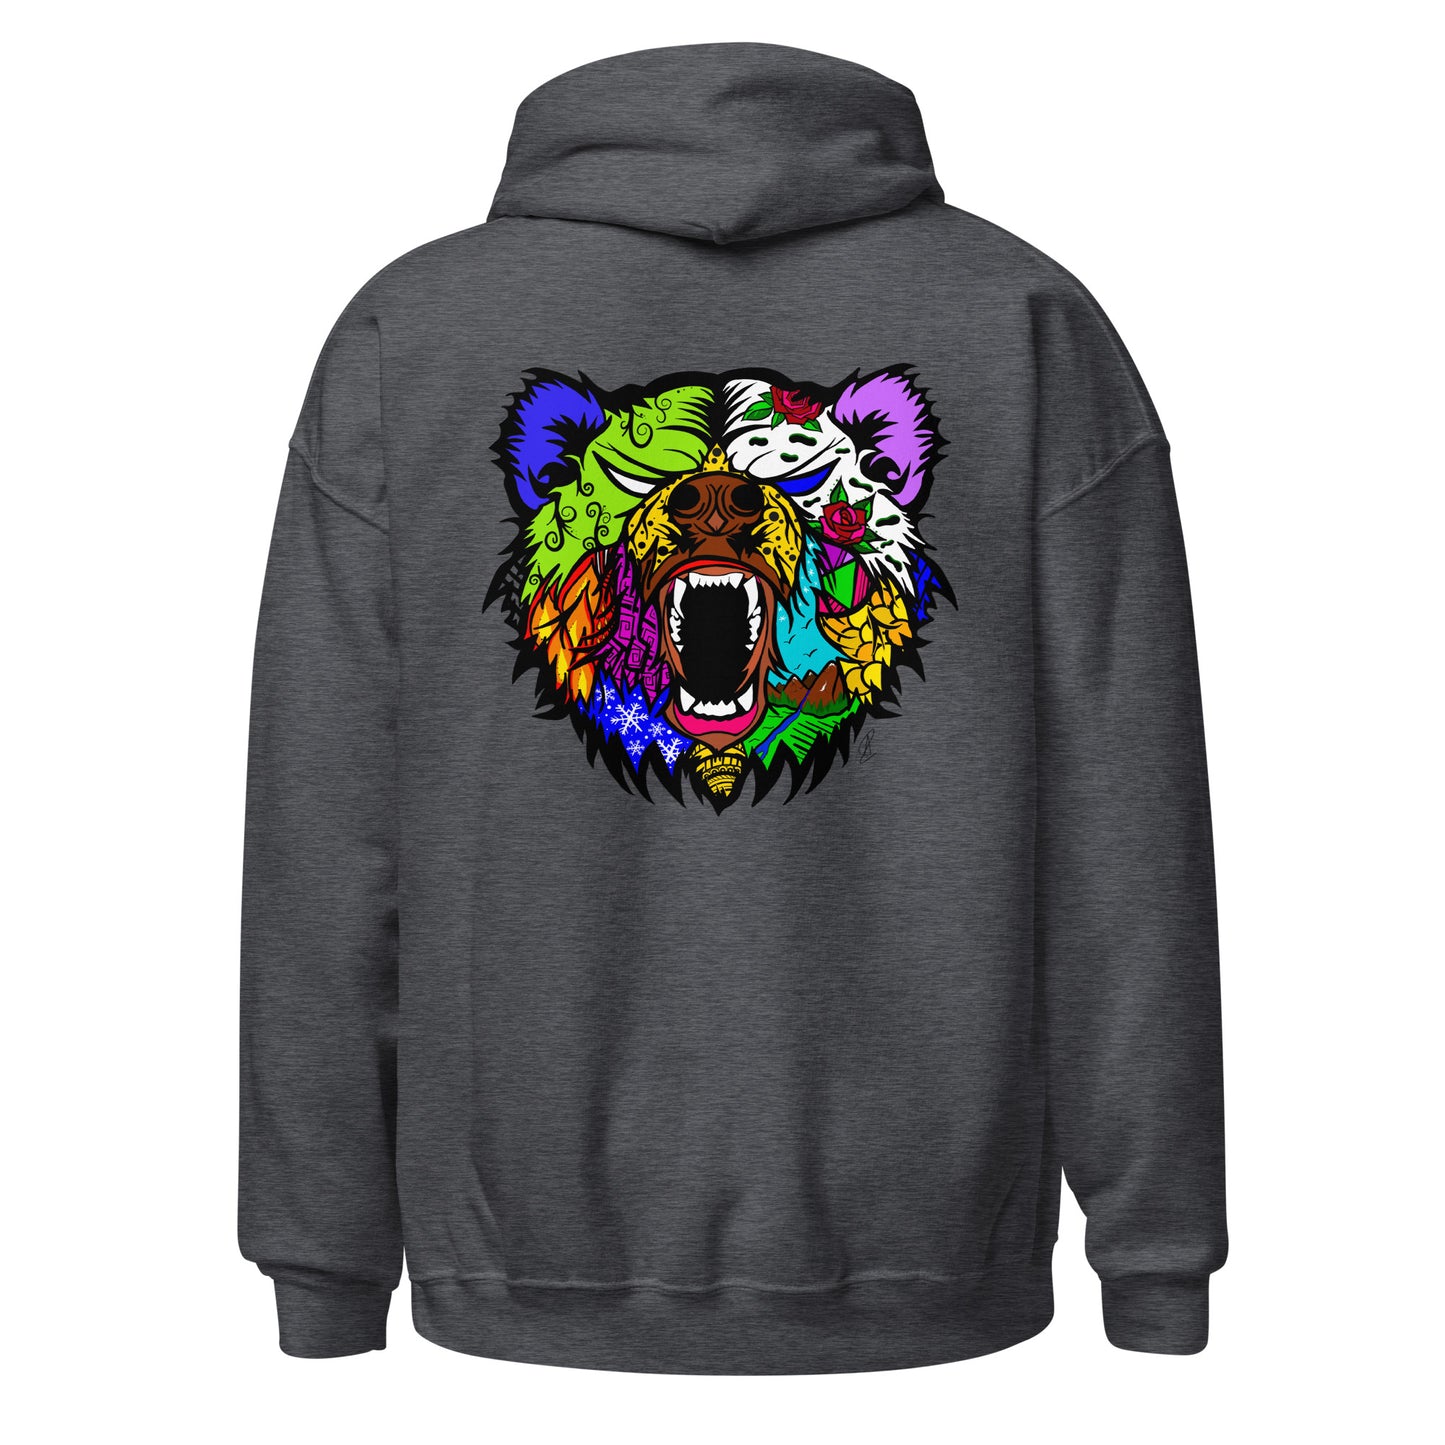 Grizzly Bear - Unisex Hoodie